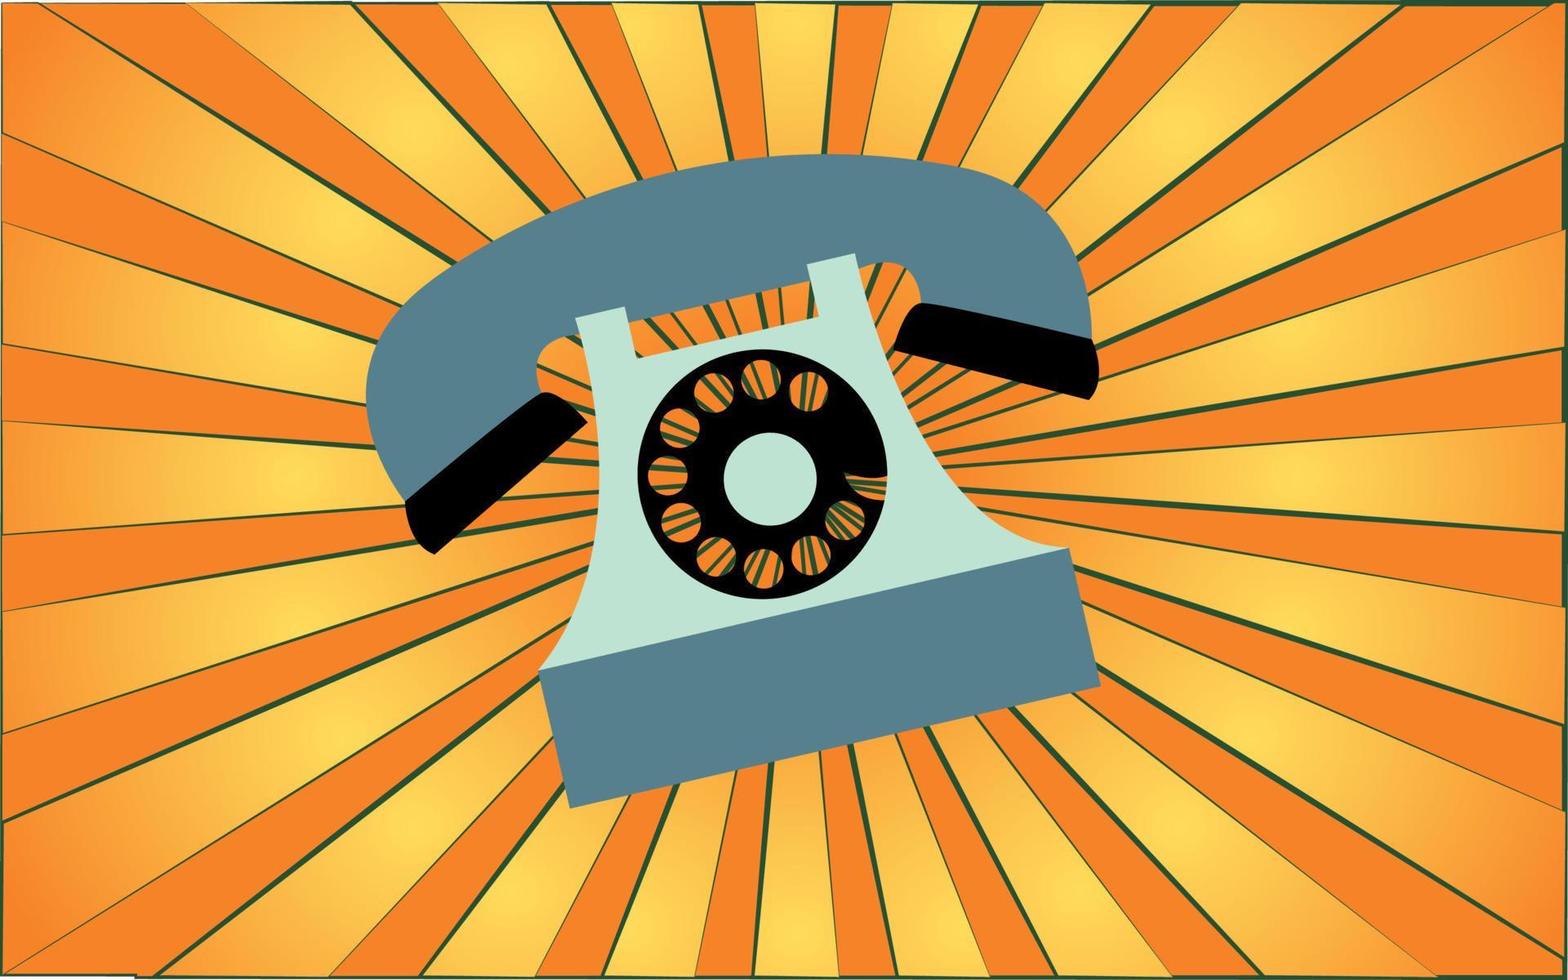 Retro old antique hipster landline telephone with handset from 70s, 80s, 90s, 2000s against a background of abstract yellow rays. Vector illustration